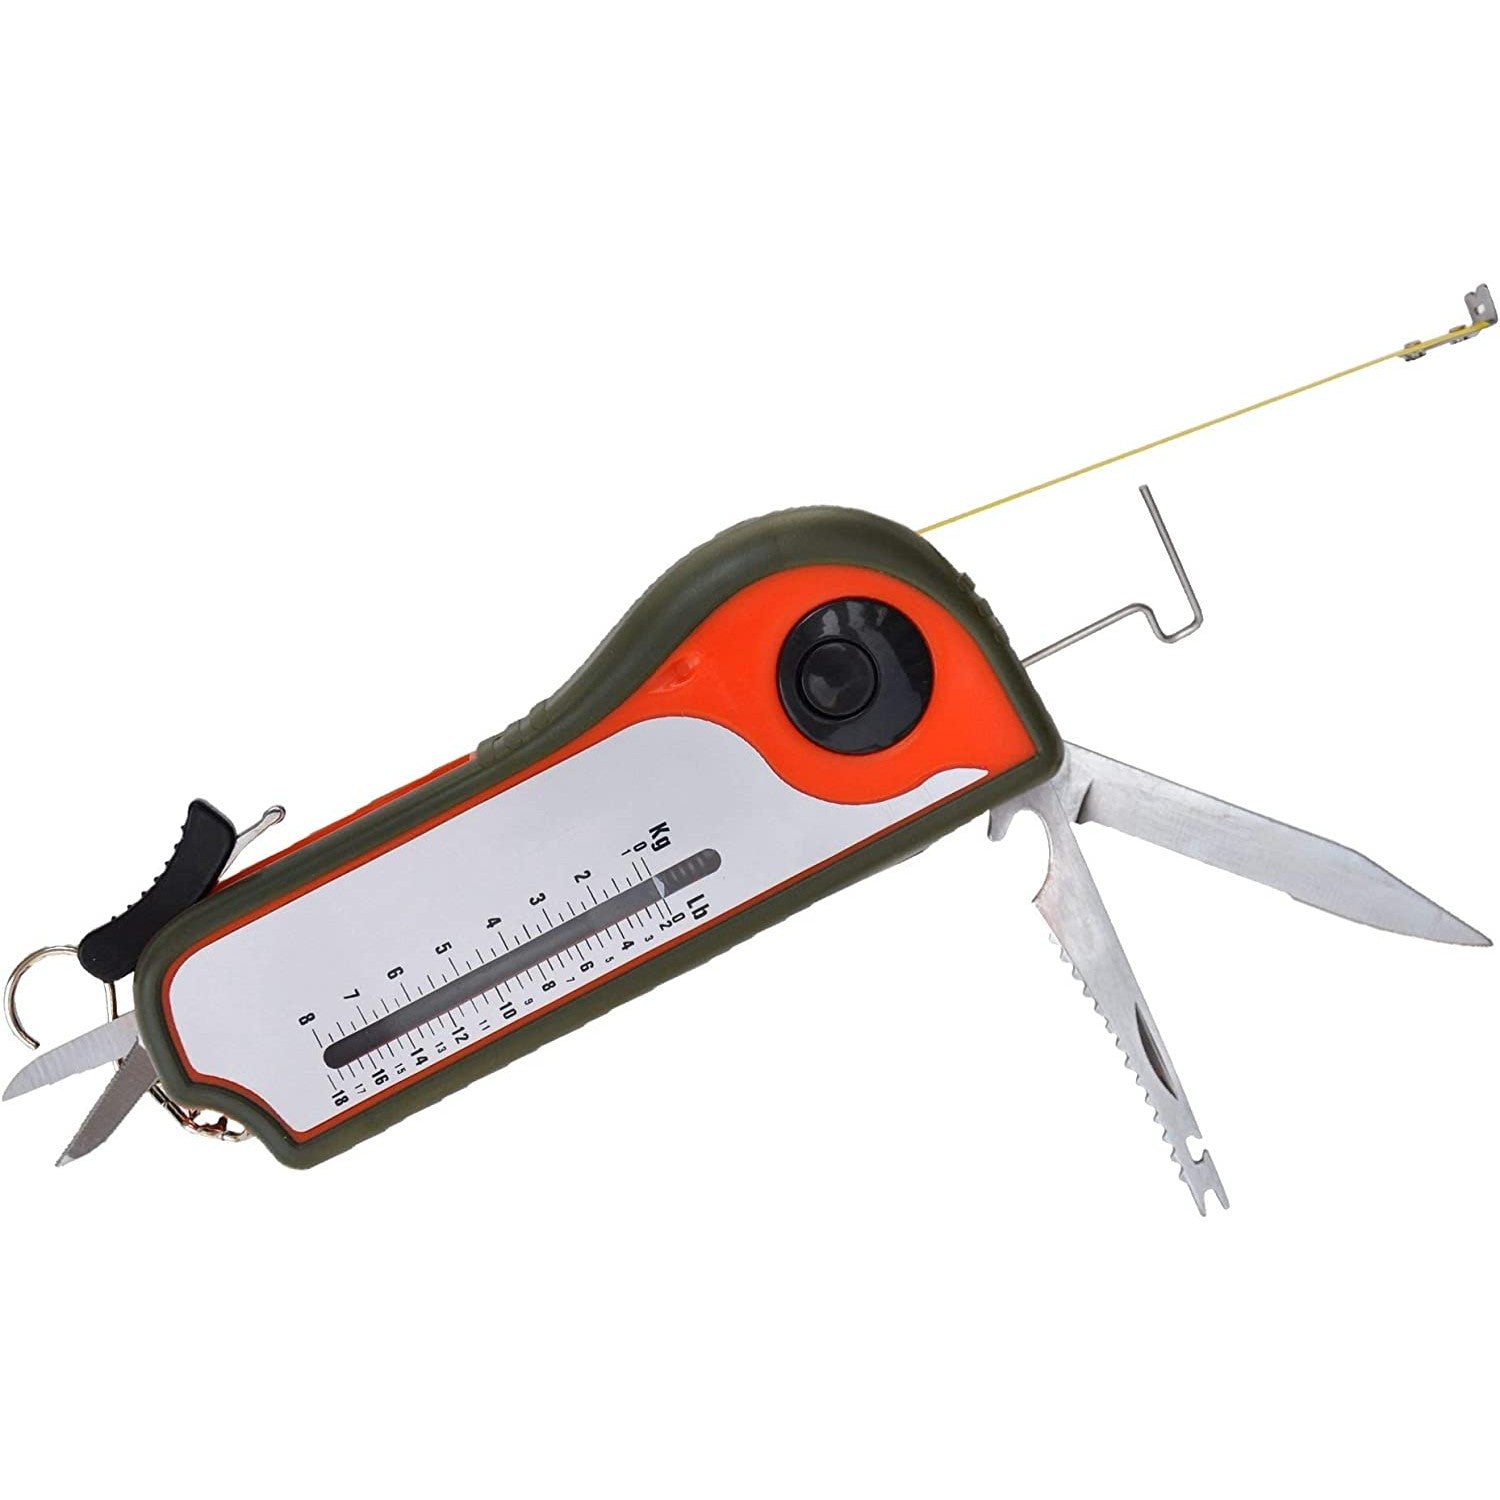 A fishing multitool with some of the various tools shown such as a tape measure, weight scale, scaling knife and more.